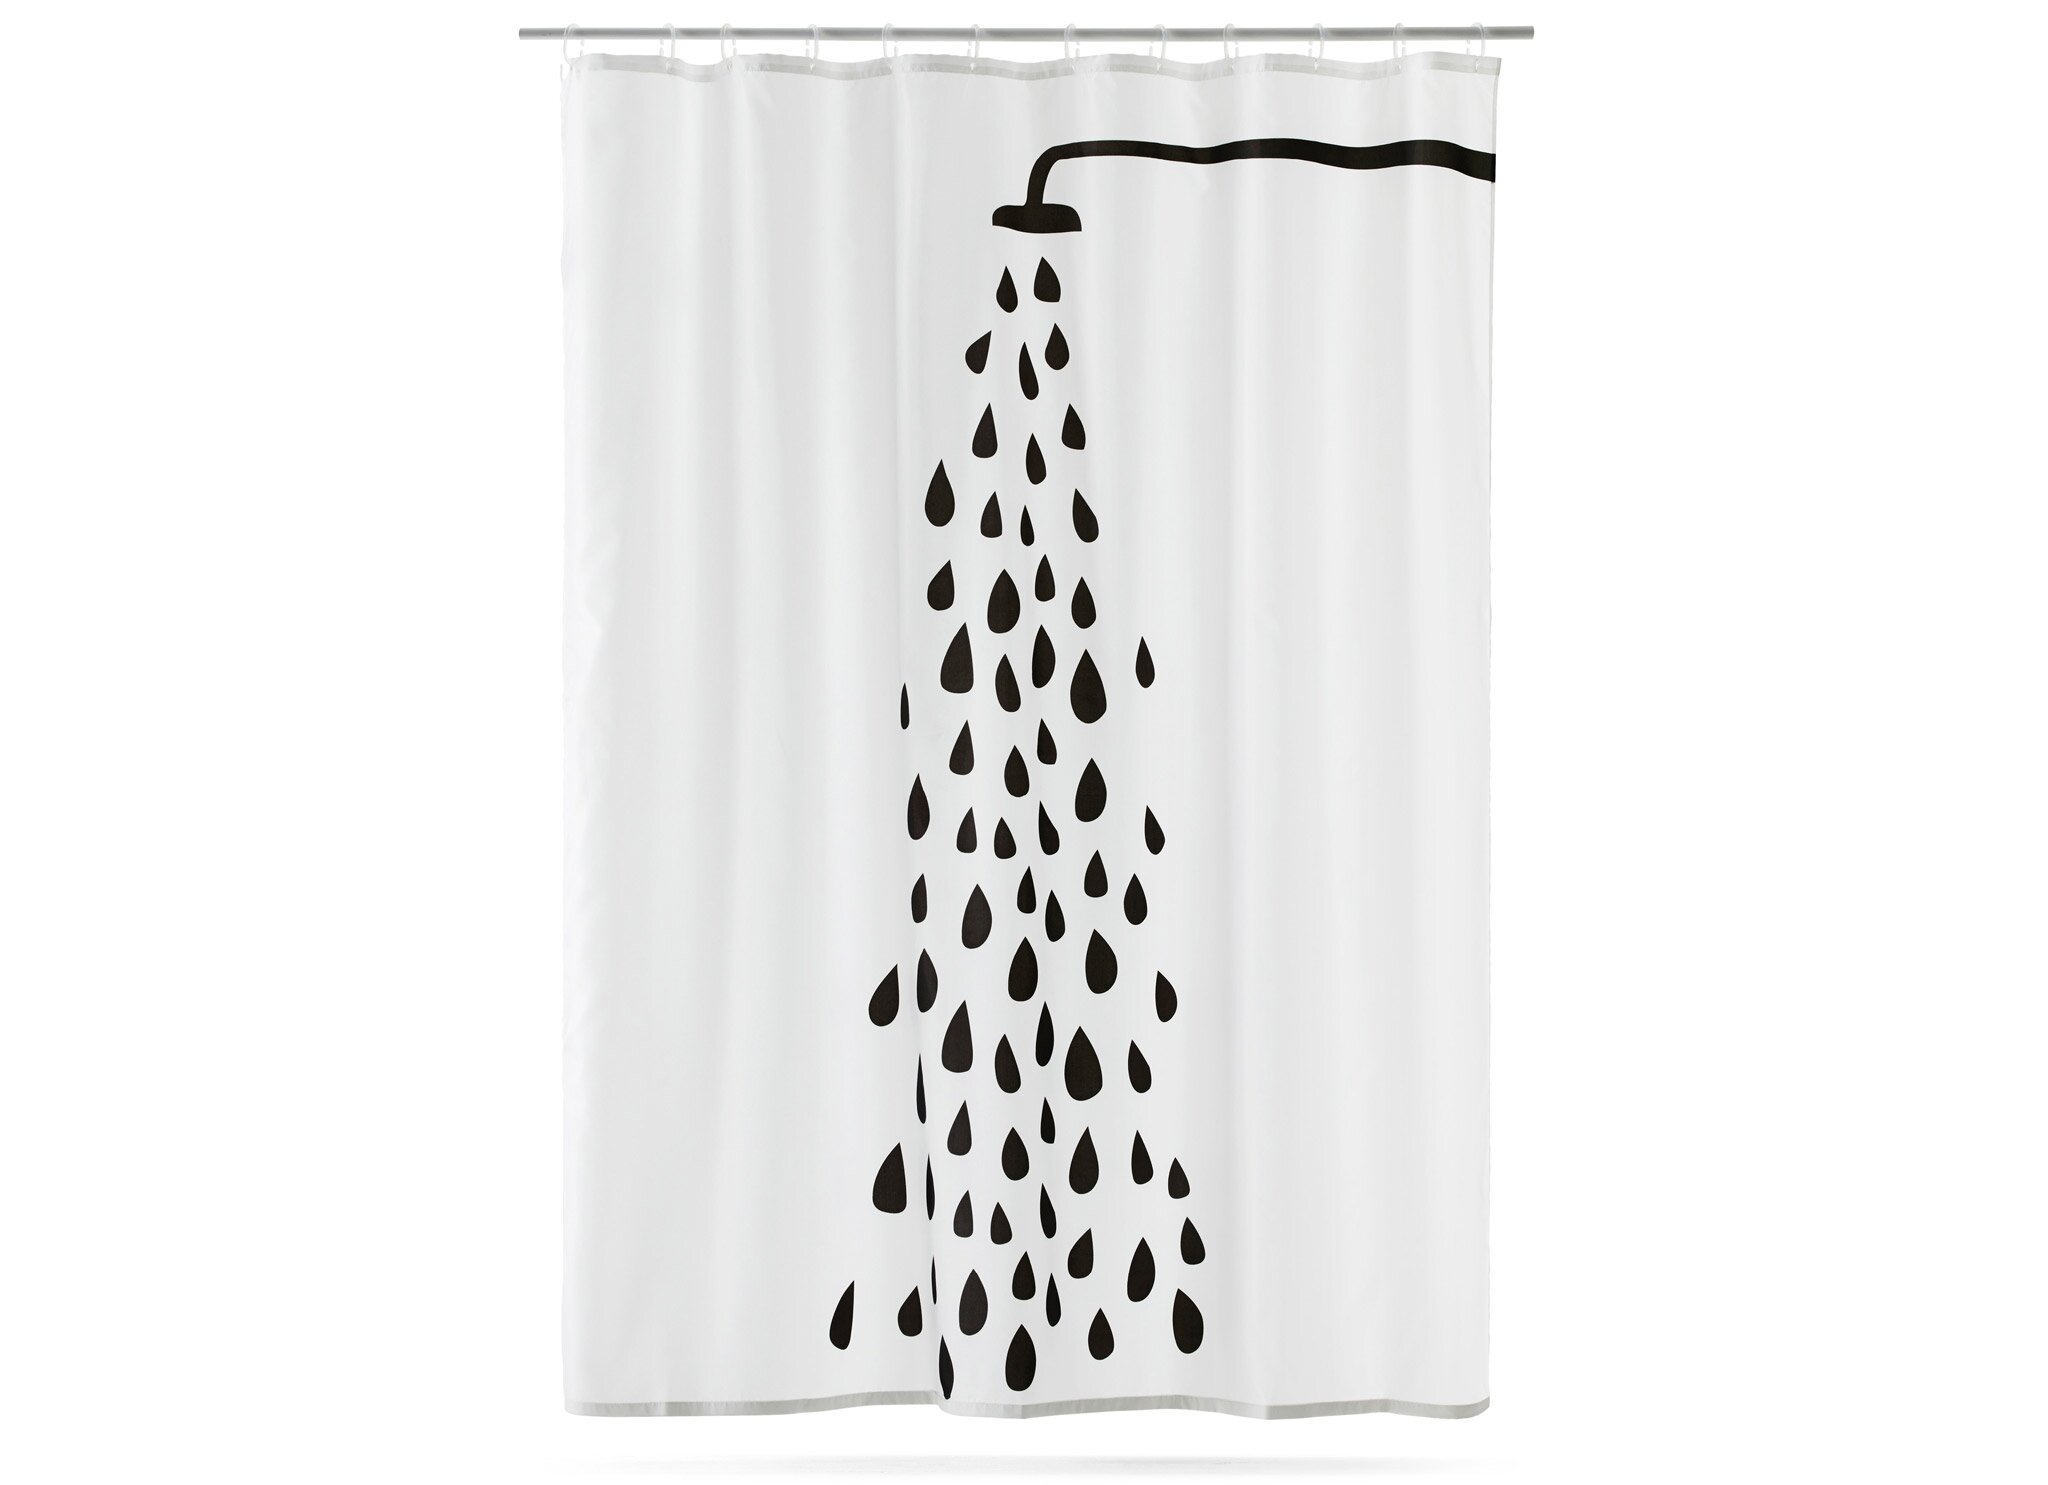 Ikea Shower Curtain for Best Your Bathroom Decoration: Ikea Shower Curtain | Shower Curtain Measurements | Cheap Shower Curtains